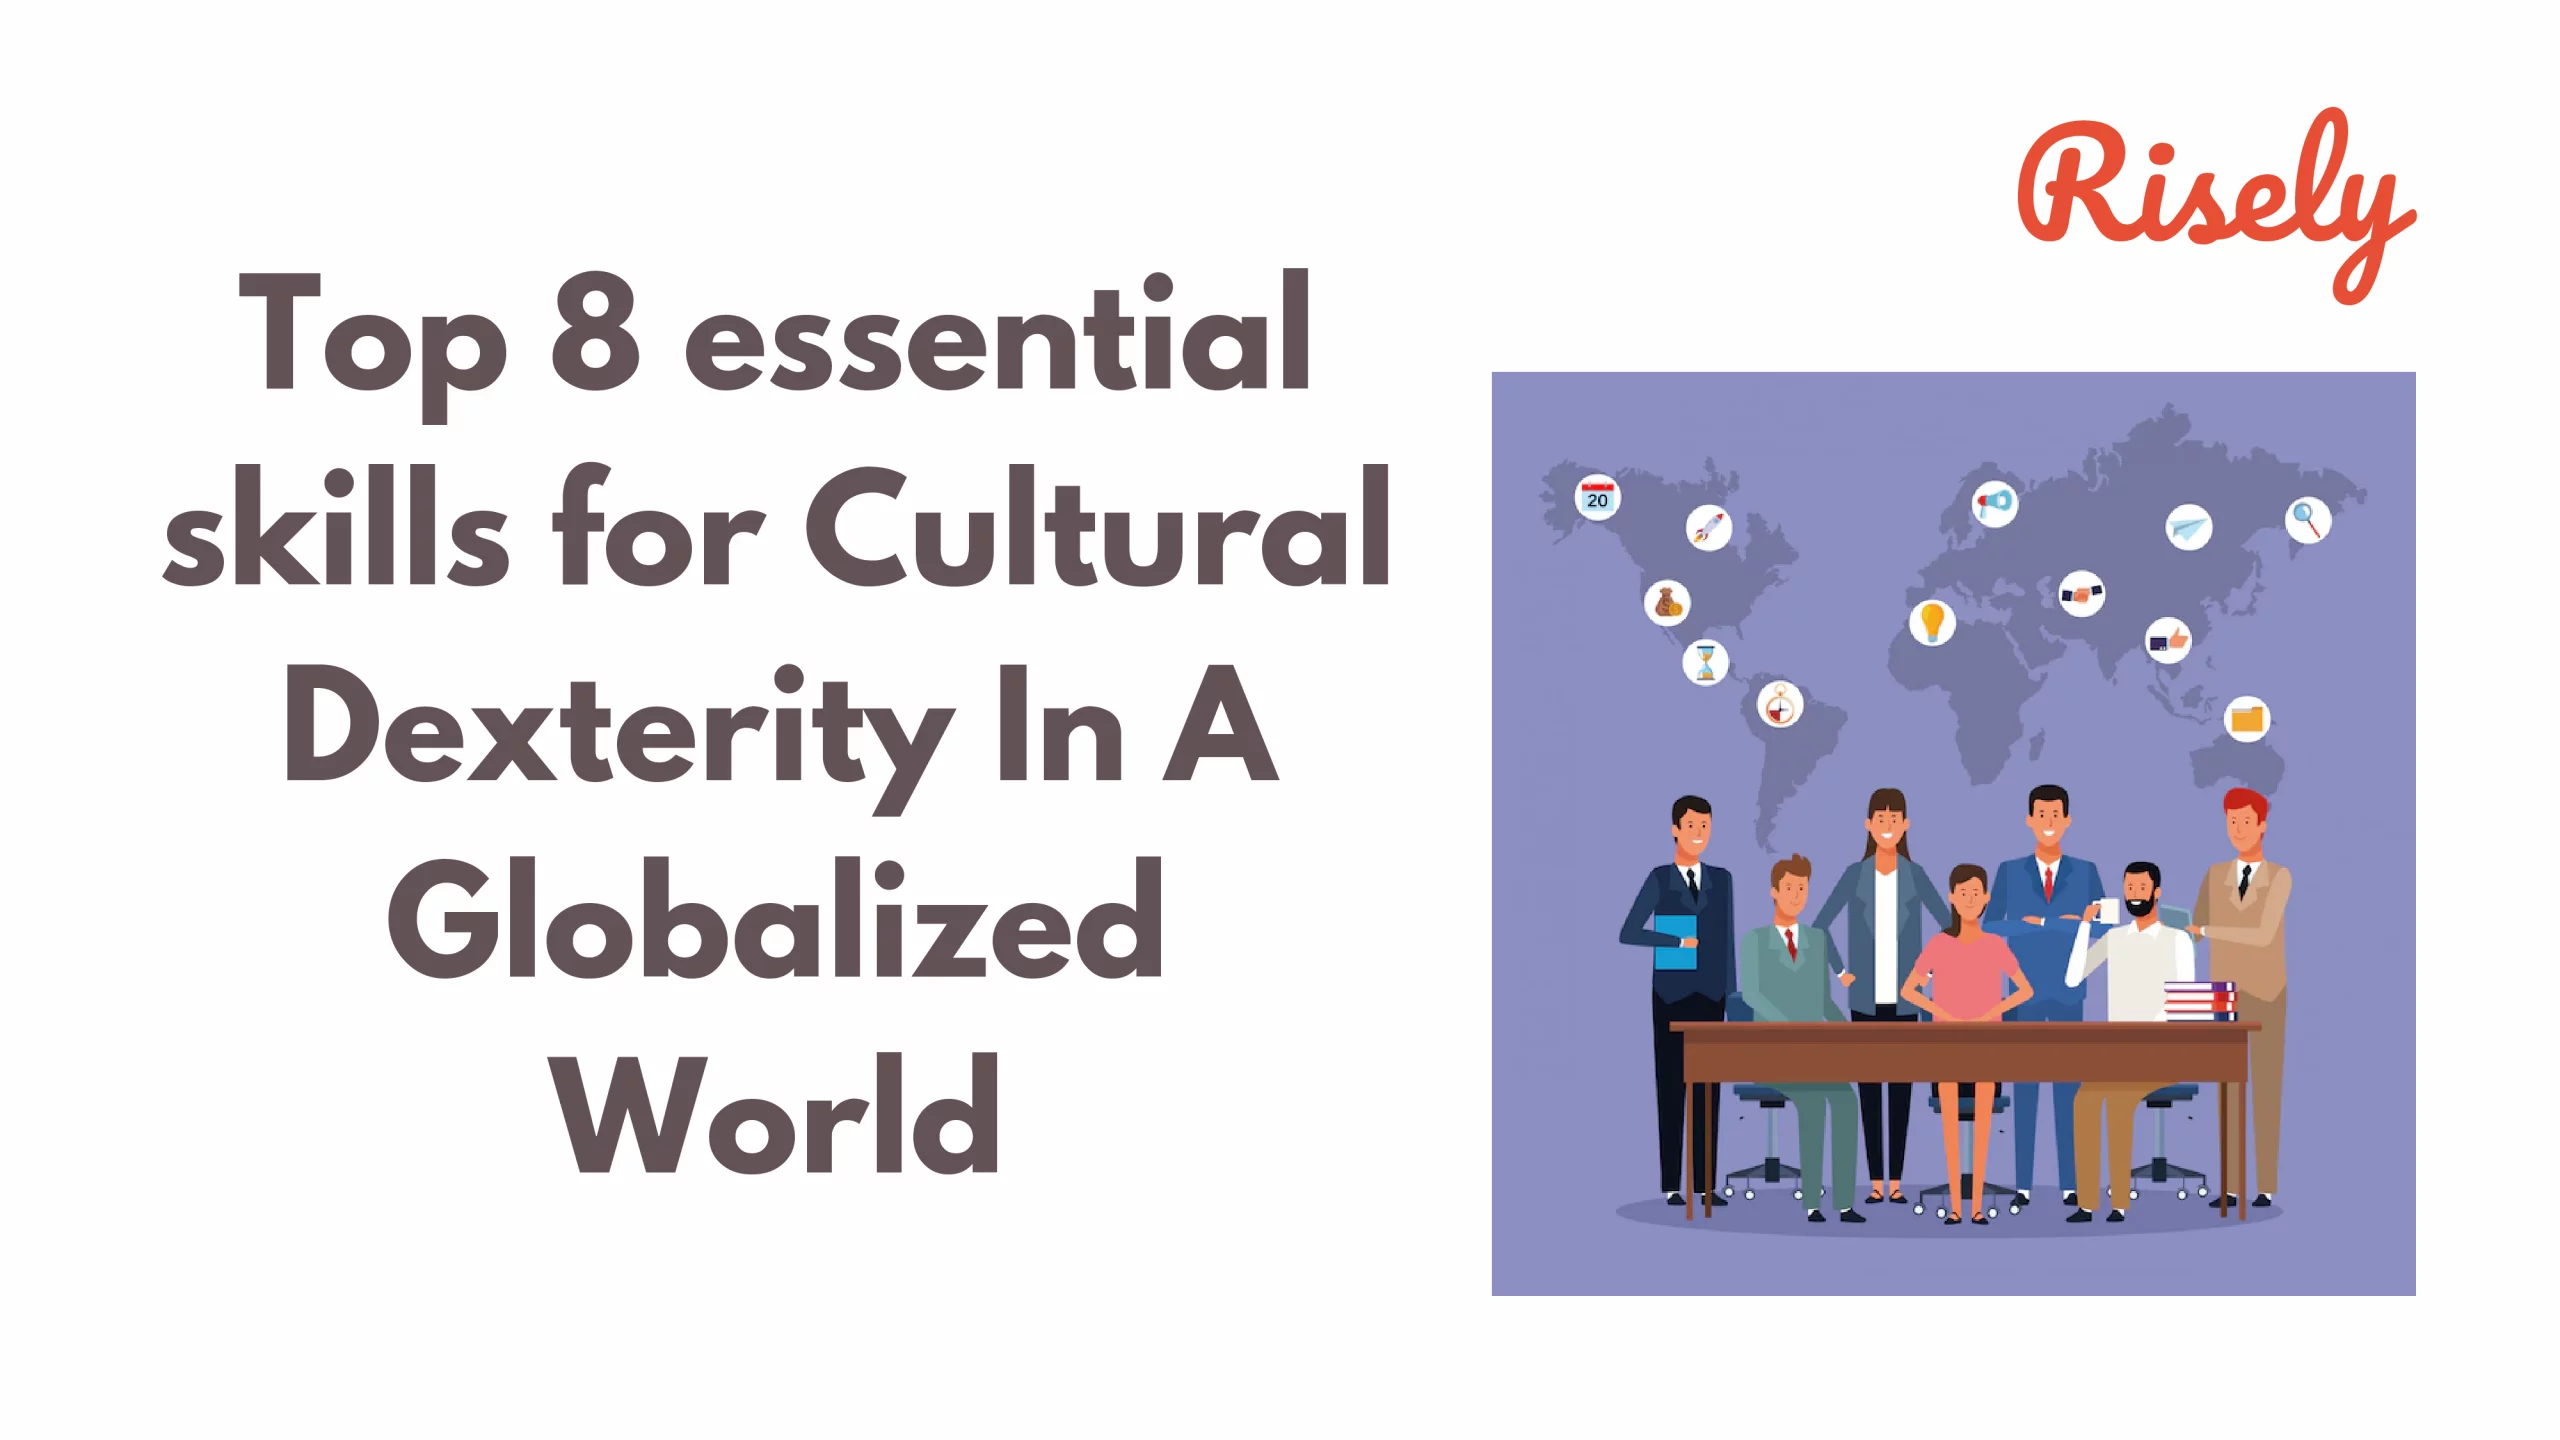 Top 8 essential skills for Cultural Dexterity In A Globalized World